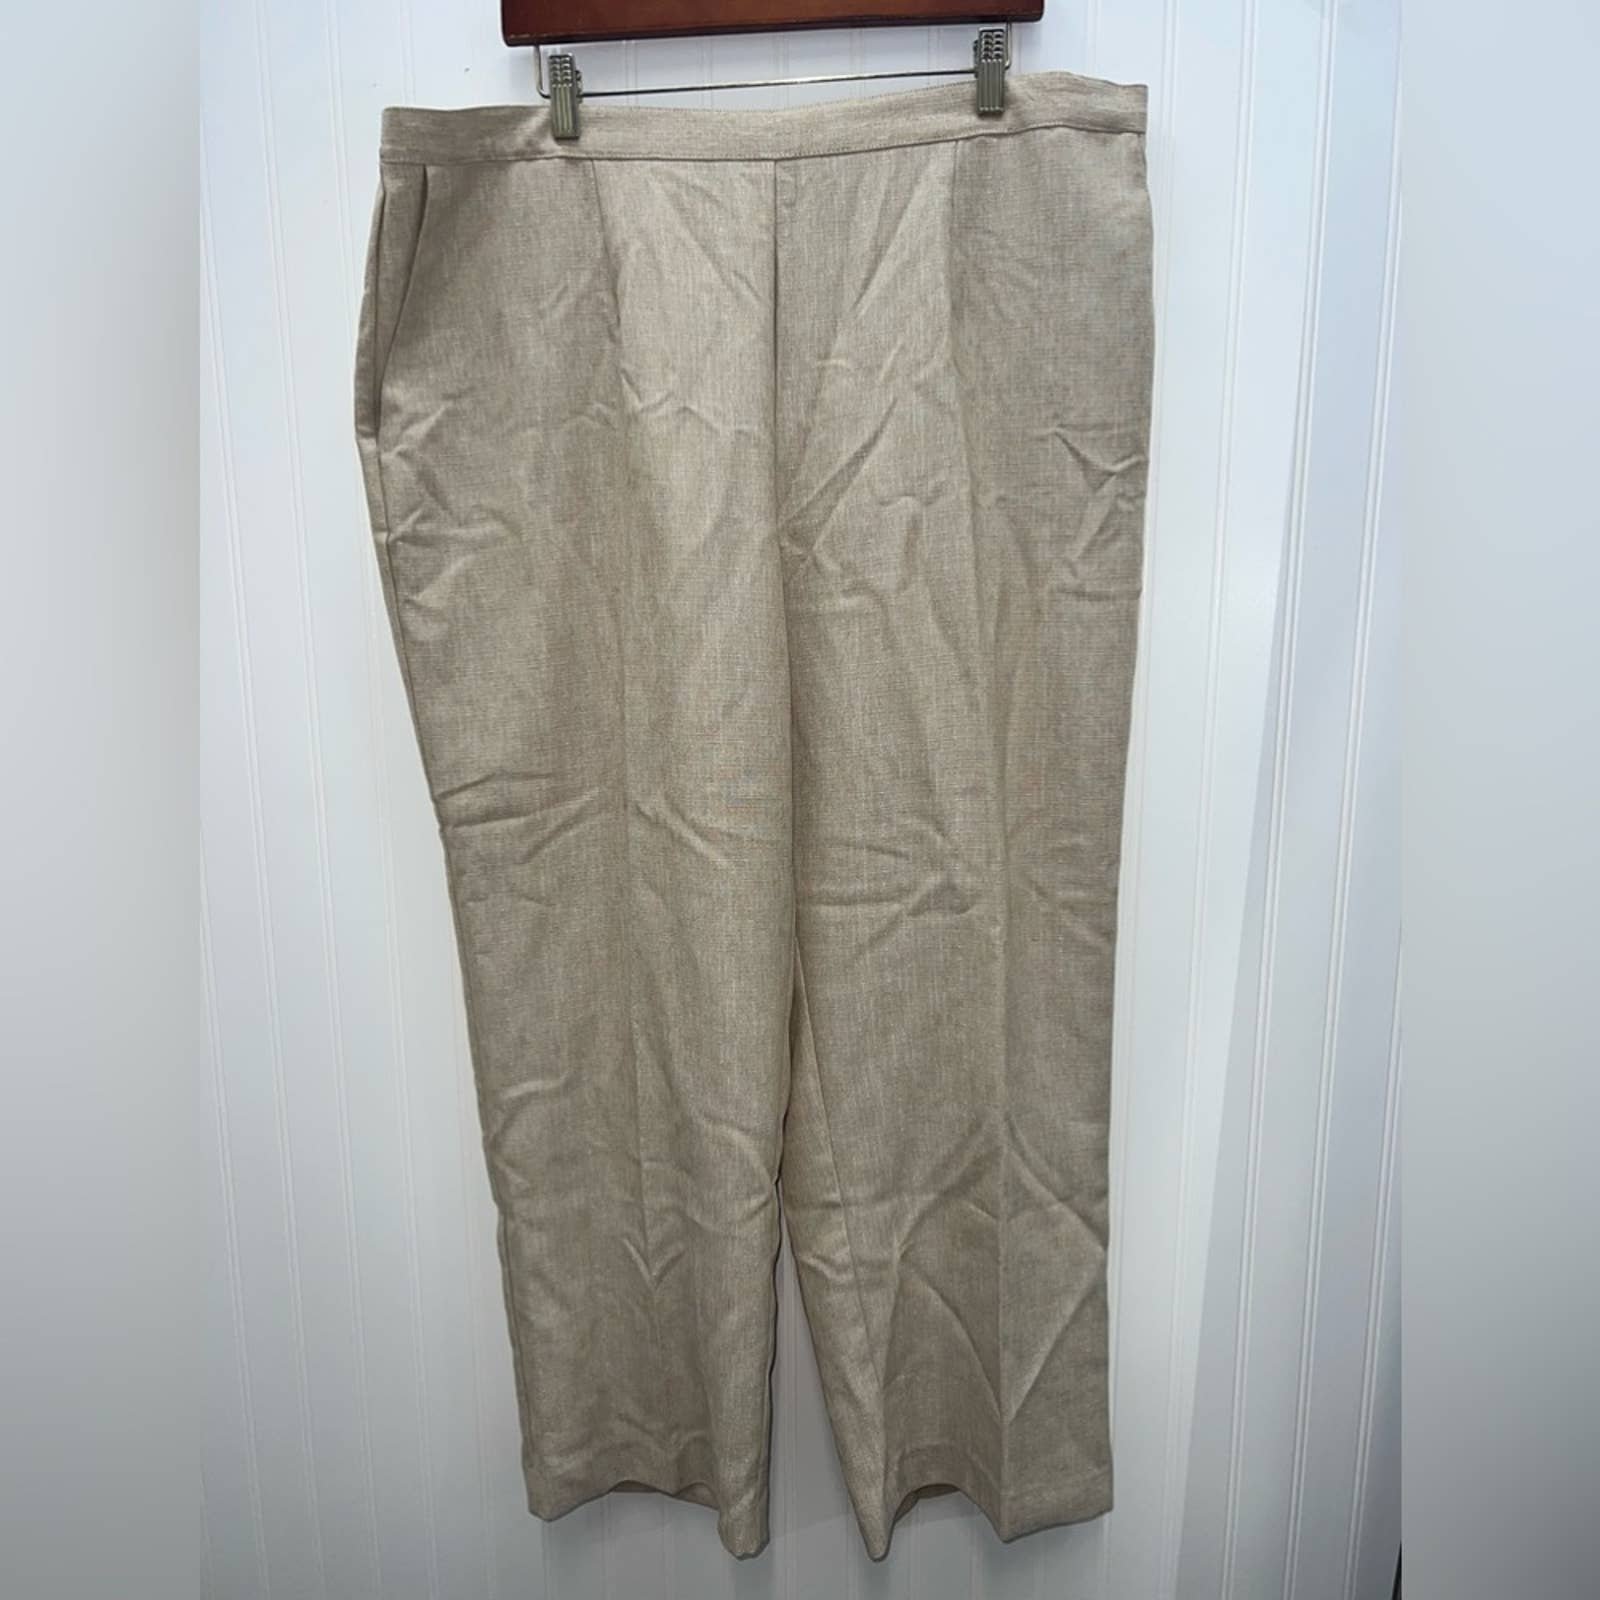 Elegant NWT Alfred Dunner Tan Pants MLA0poCTs just for 